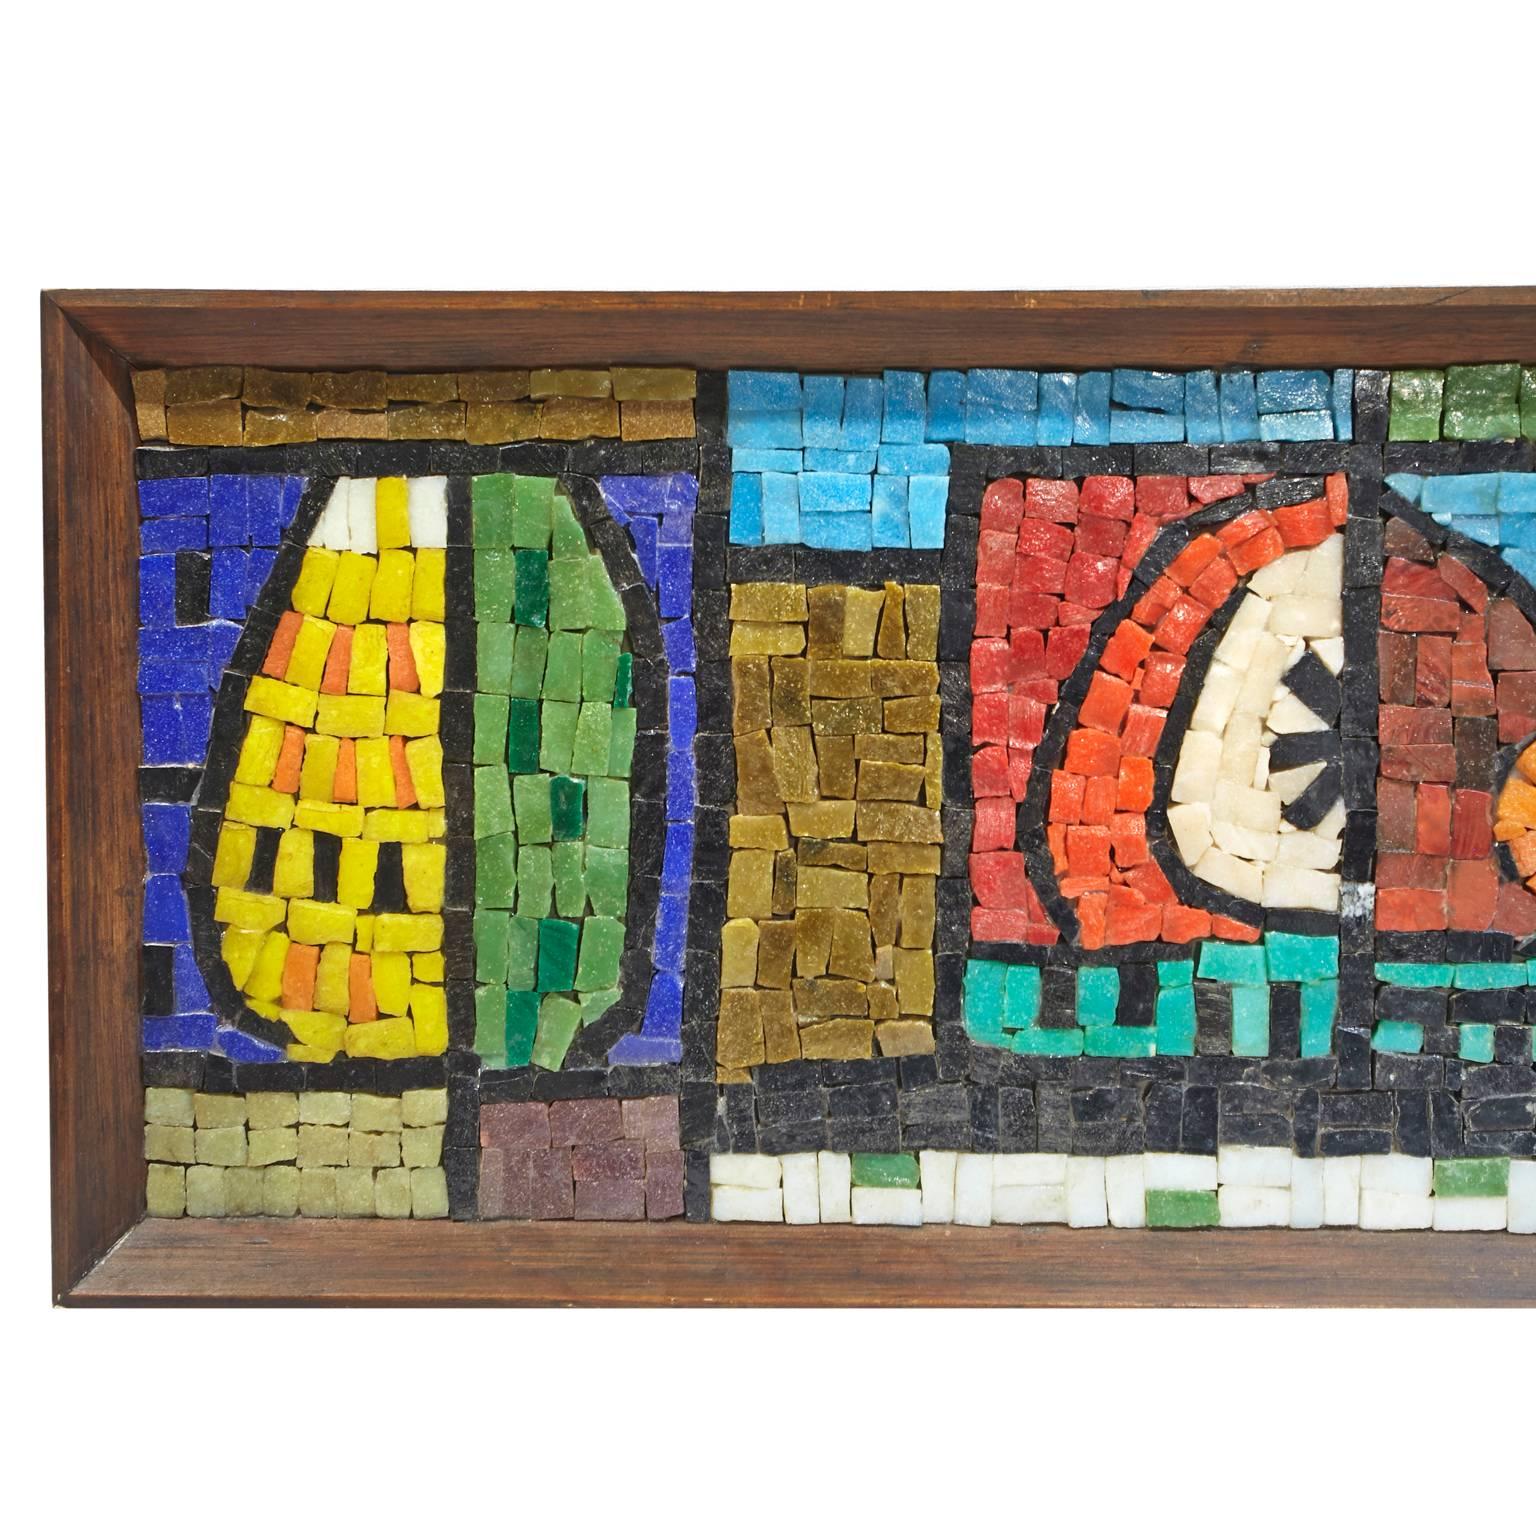 Colorful, abstract still life mosaic tile wall hanging by Evelyn Ackerman. Era industrias label on back, #402 designed-Evelyn Ackerman.